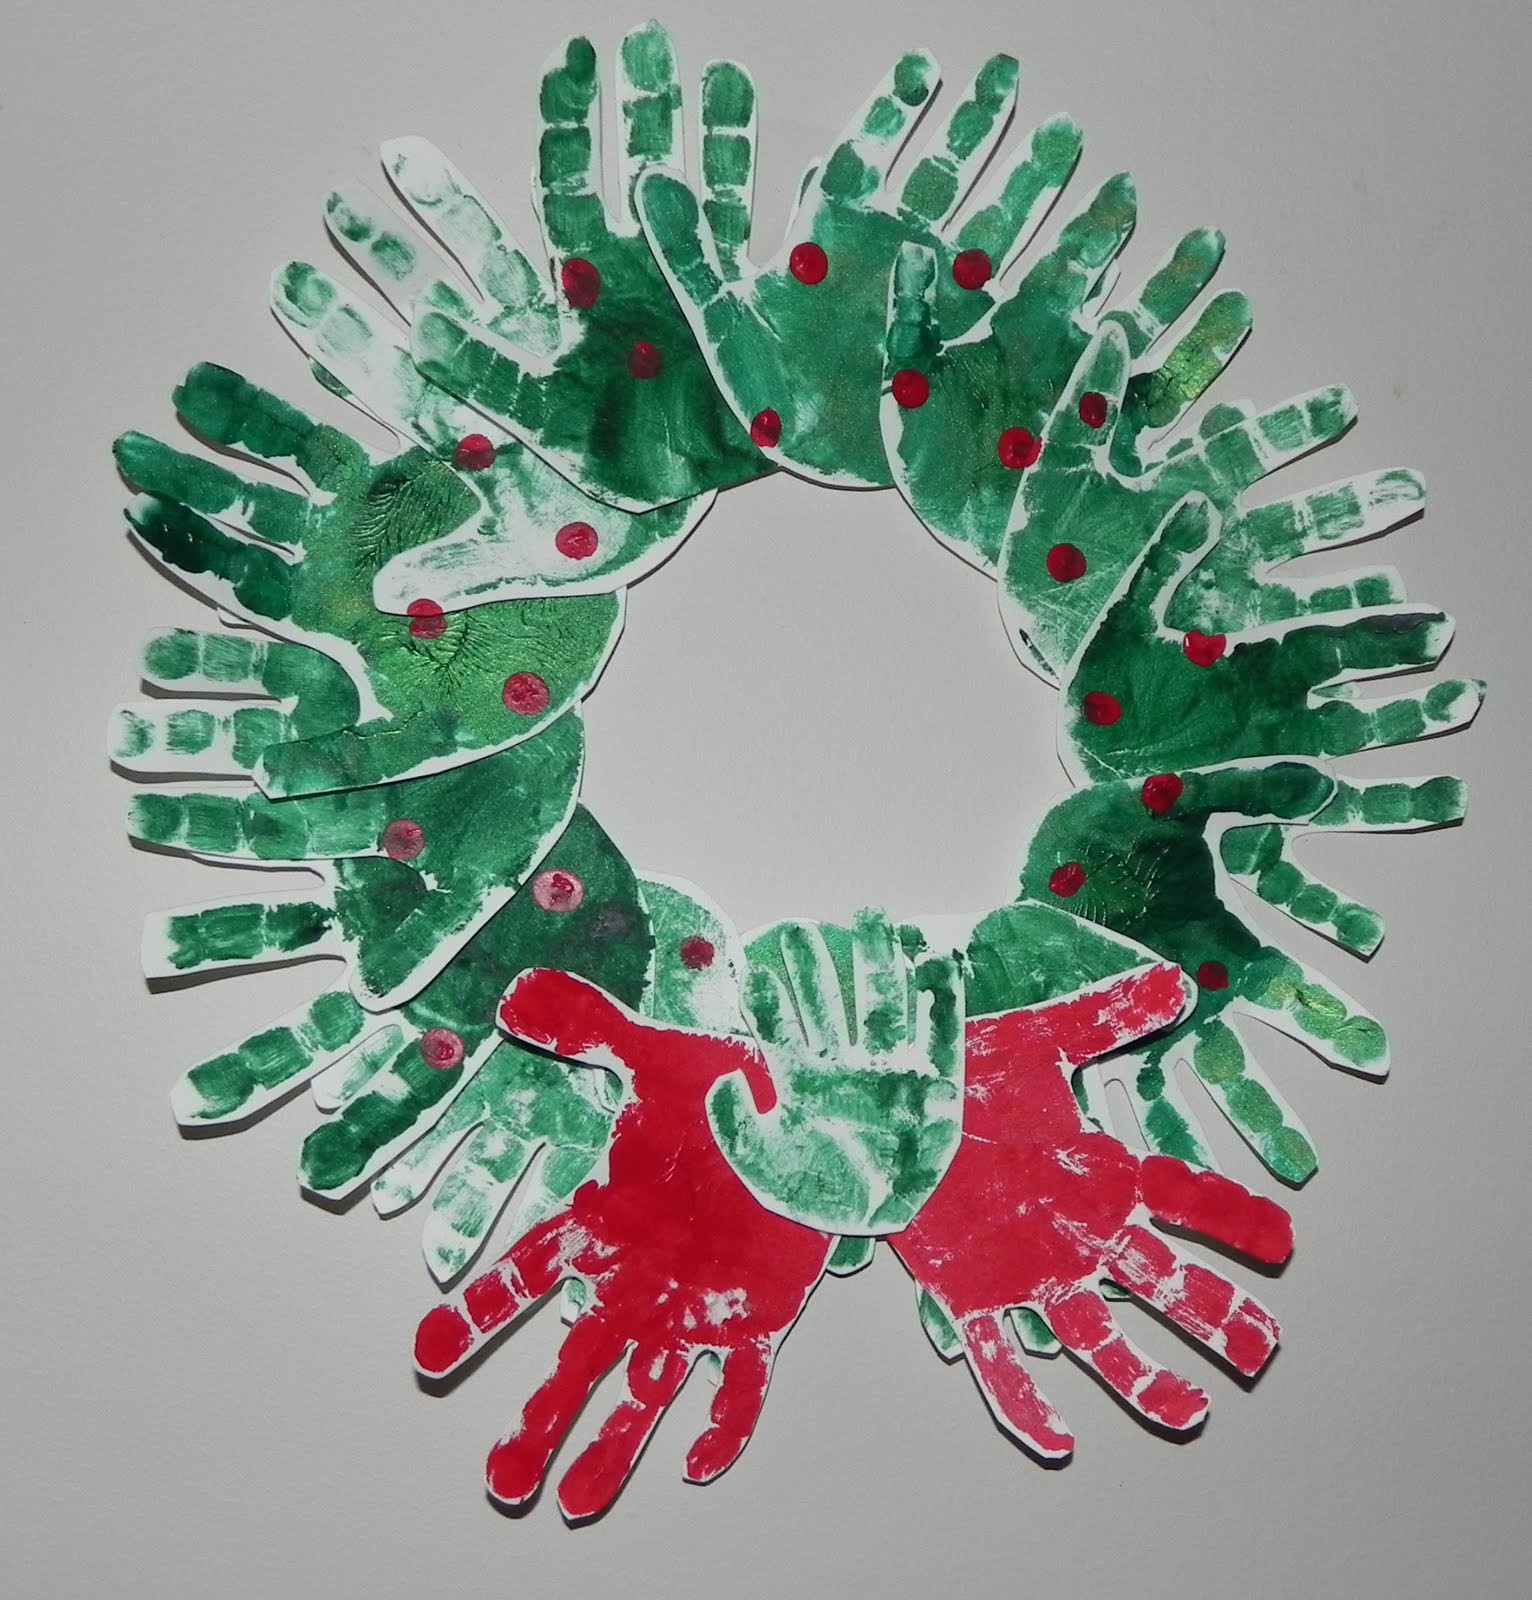 Christmas Crafts To Do With Toddlers
 Running With Glitter Glue Holiday Crafts to do with your